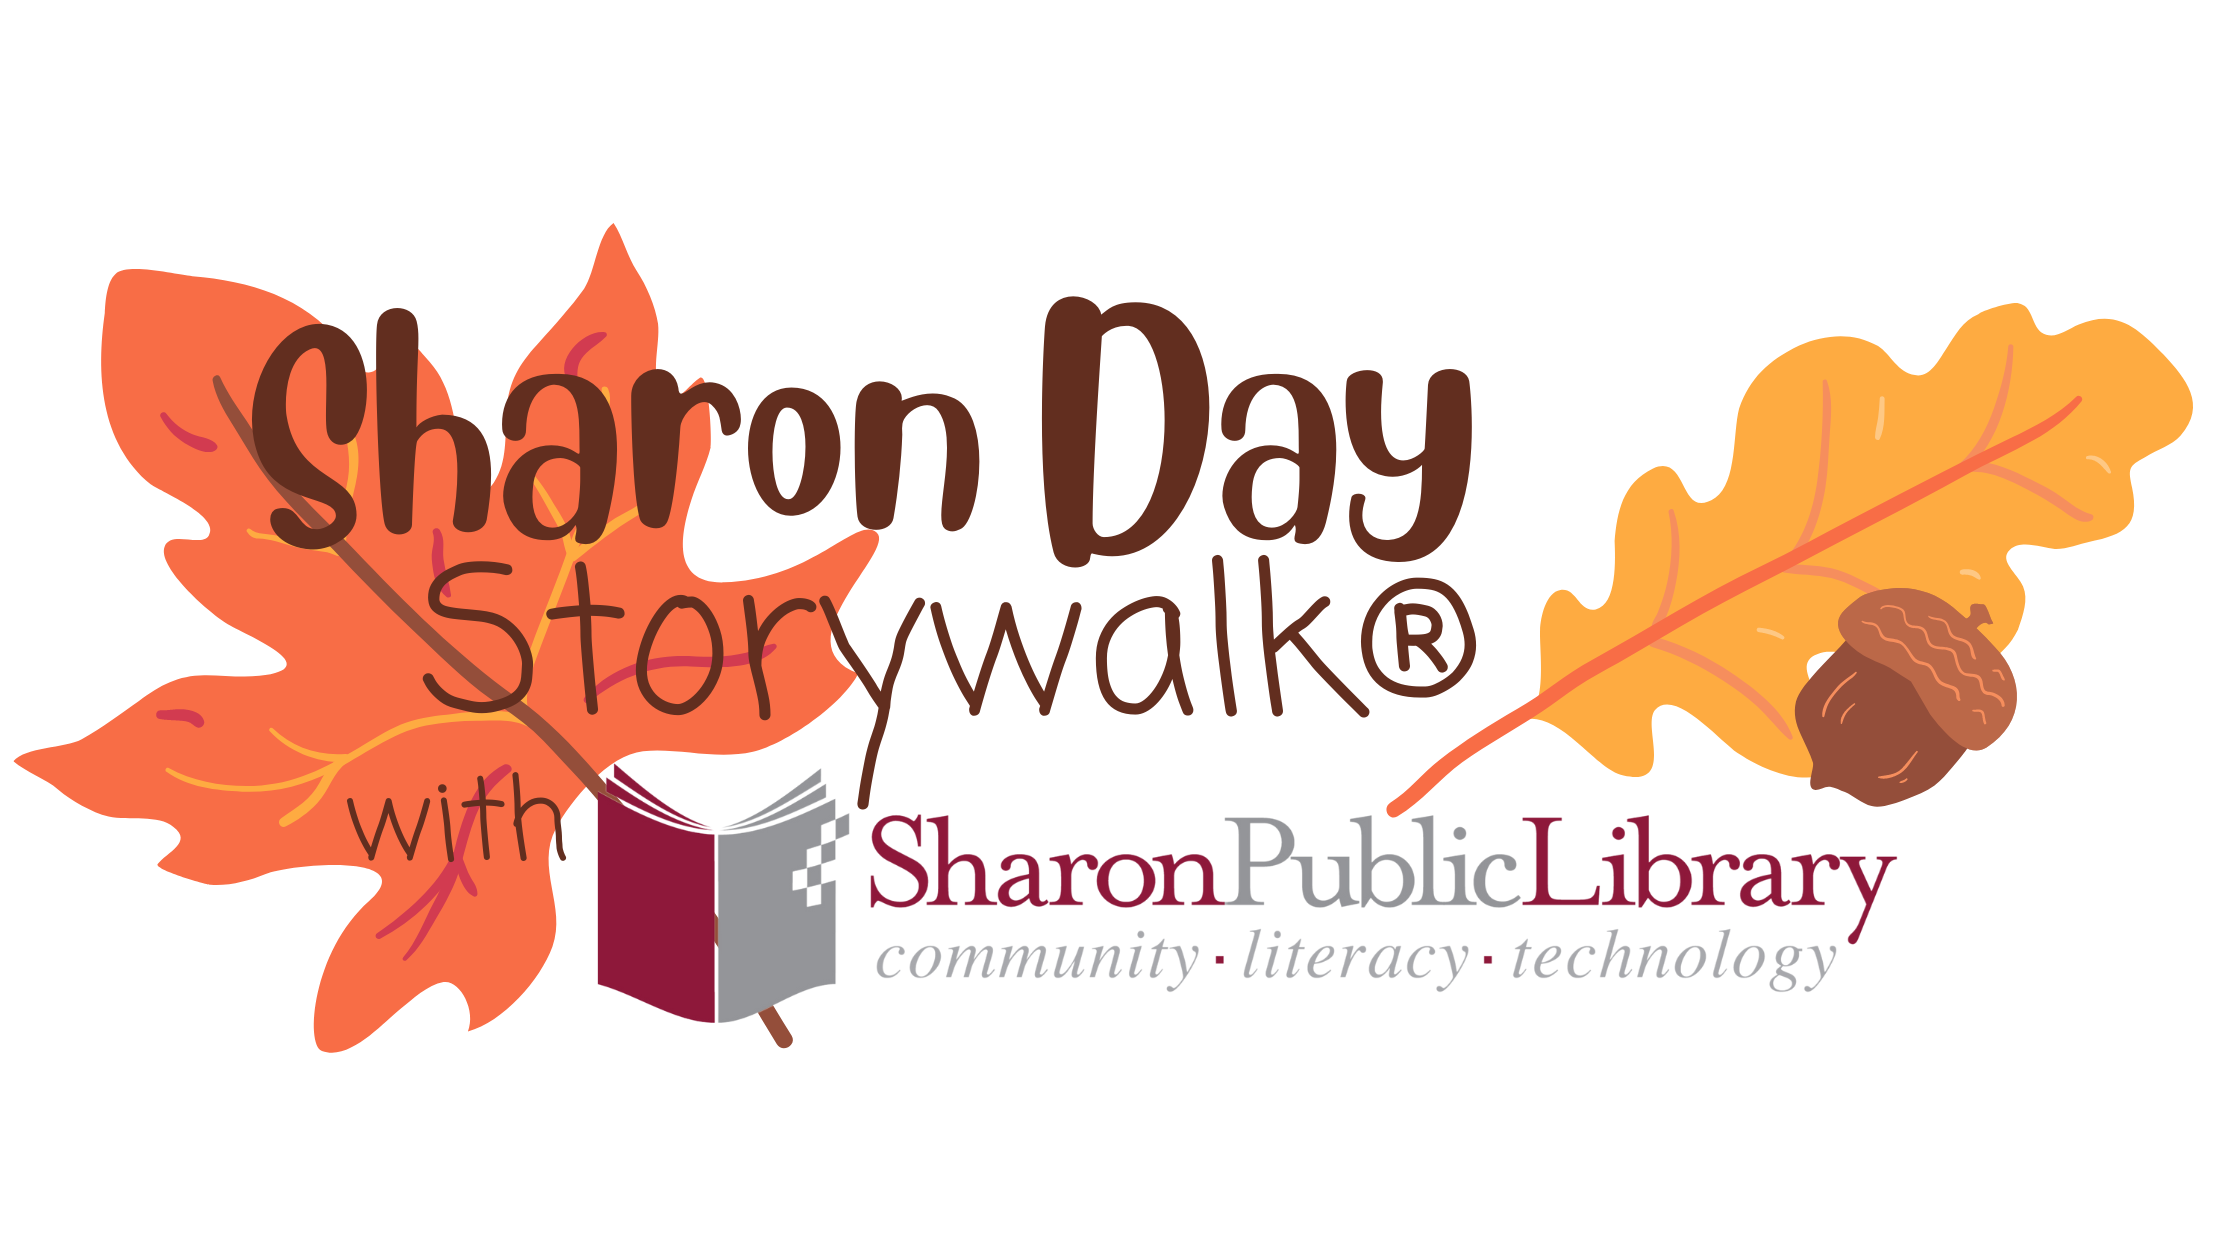 Text reads "Sharon Day Storywalk with the Sharon Public library" illustrations of leaves